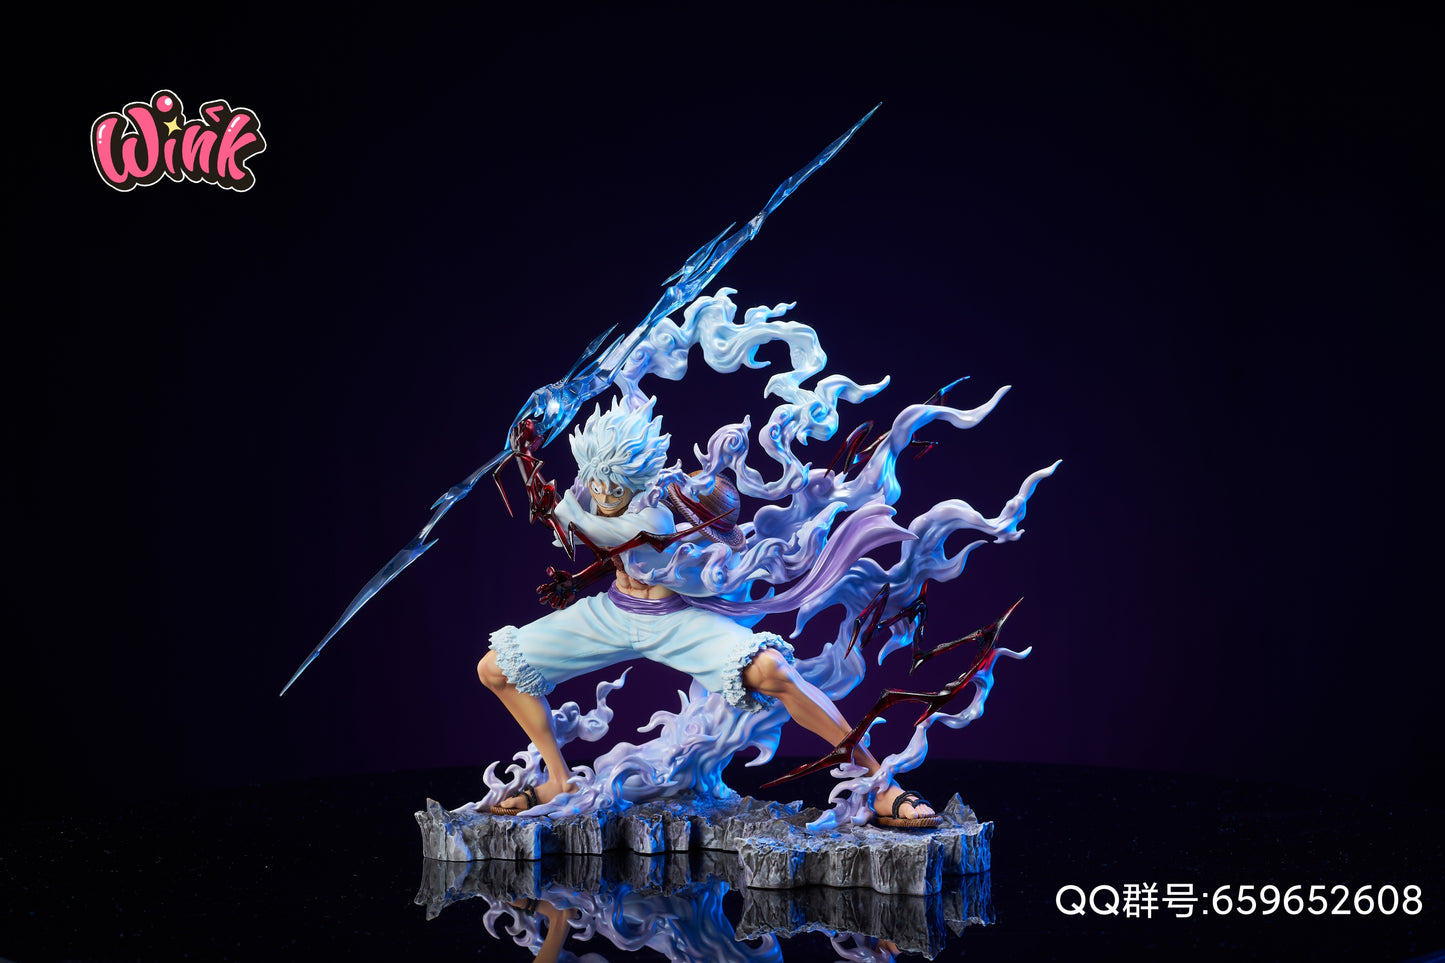 WINK STUDIO – ONE PIECE: "POP" SERIES 1. LIGHTNING BOLT NIKA LUFFY [SOLD OUT]